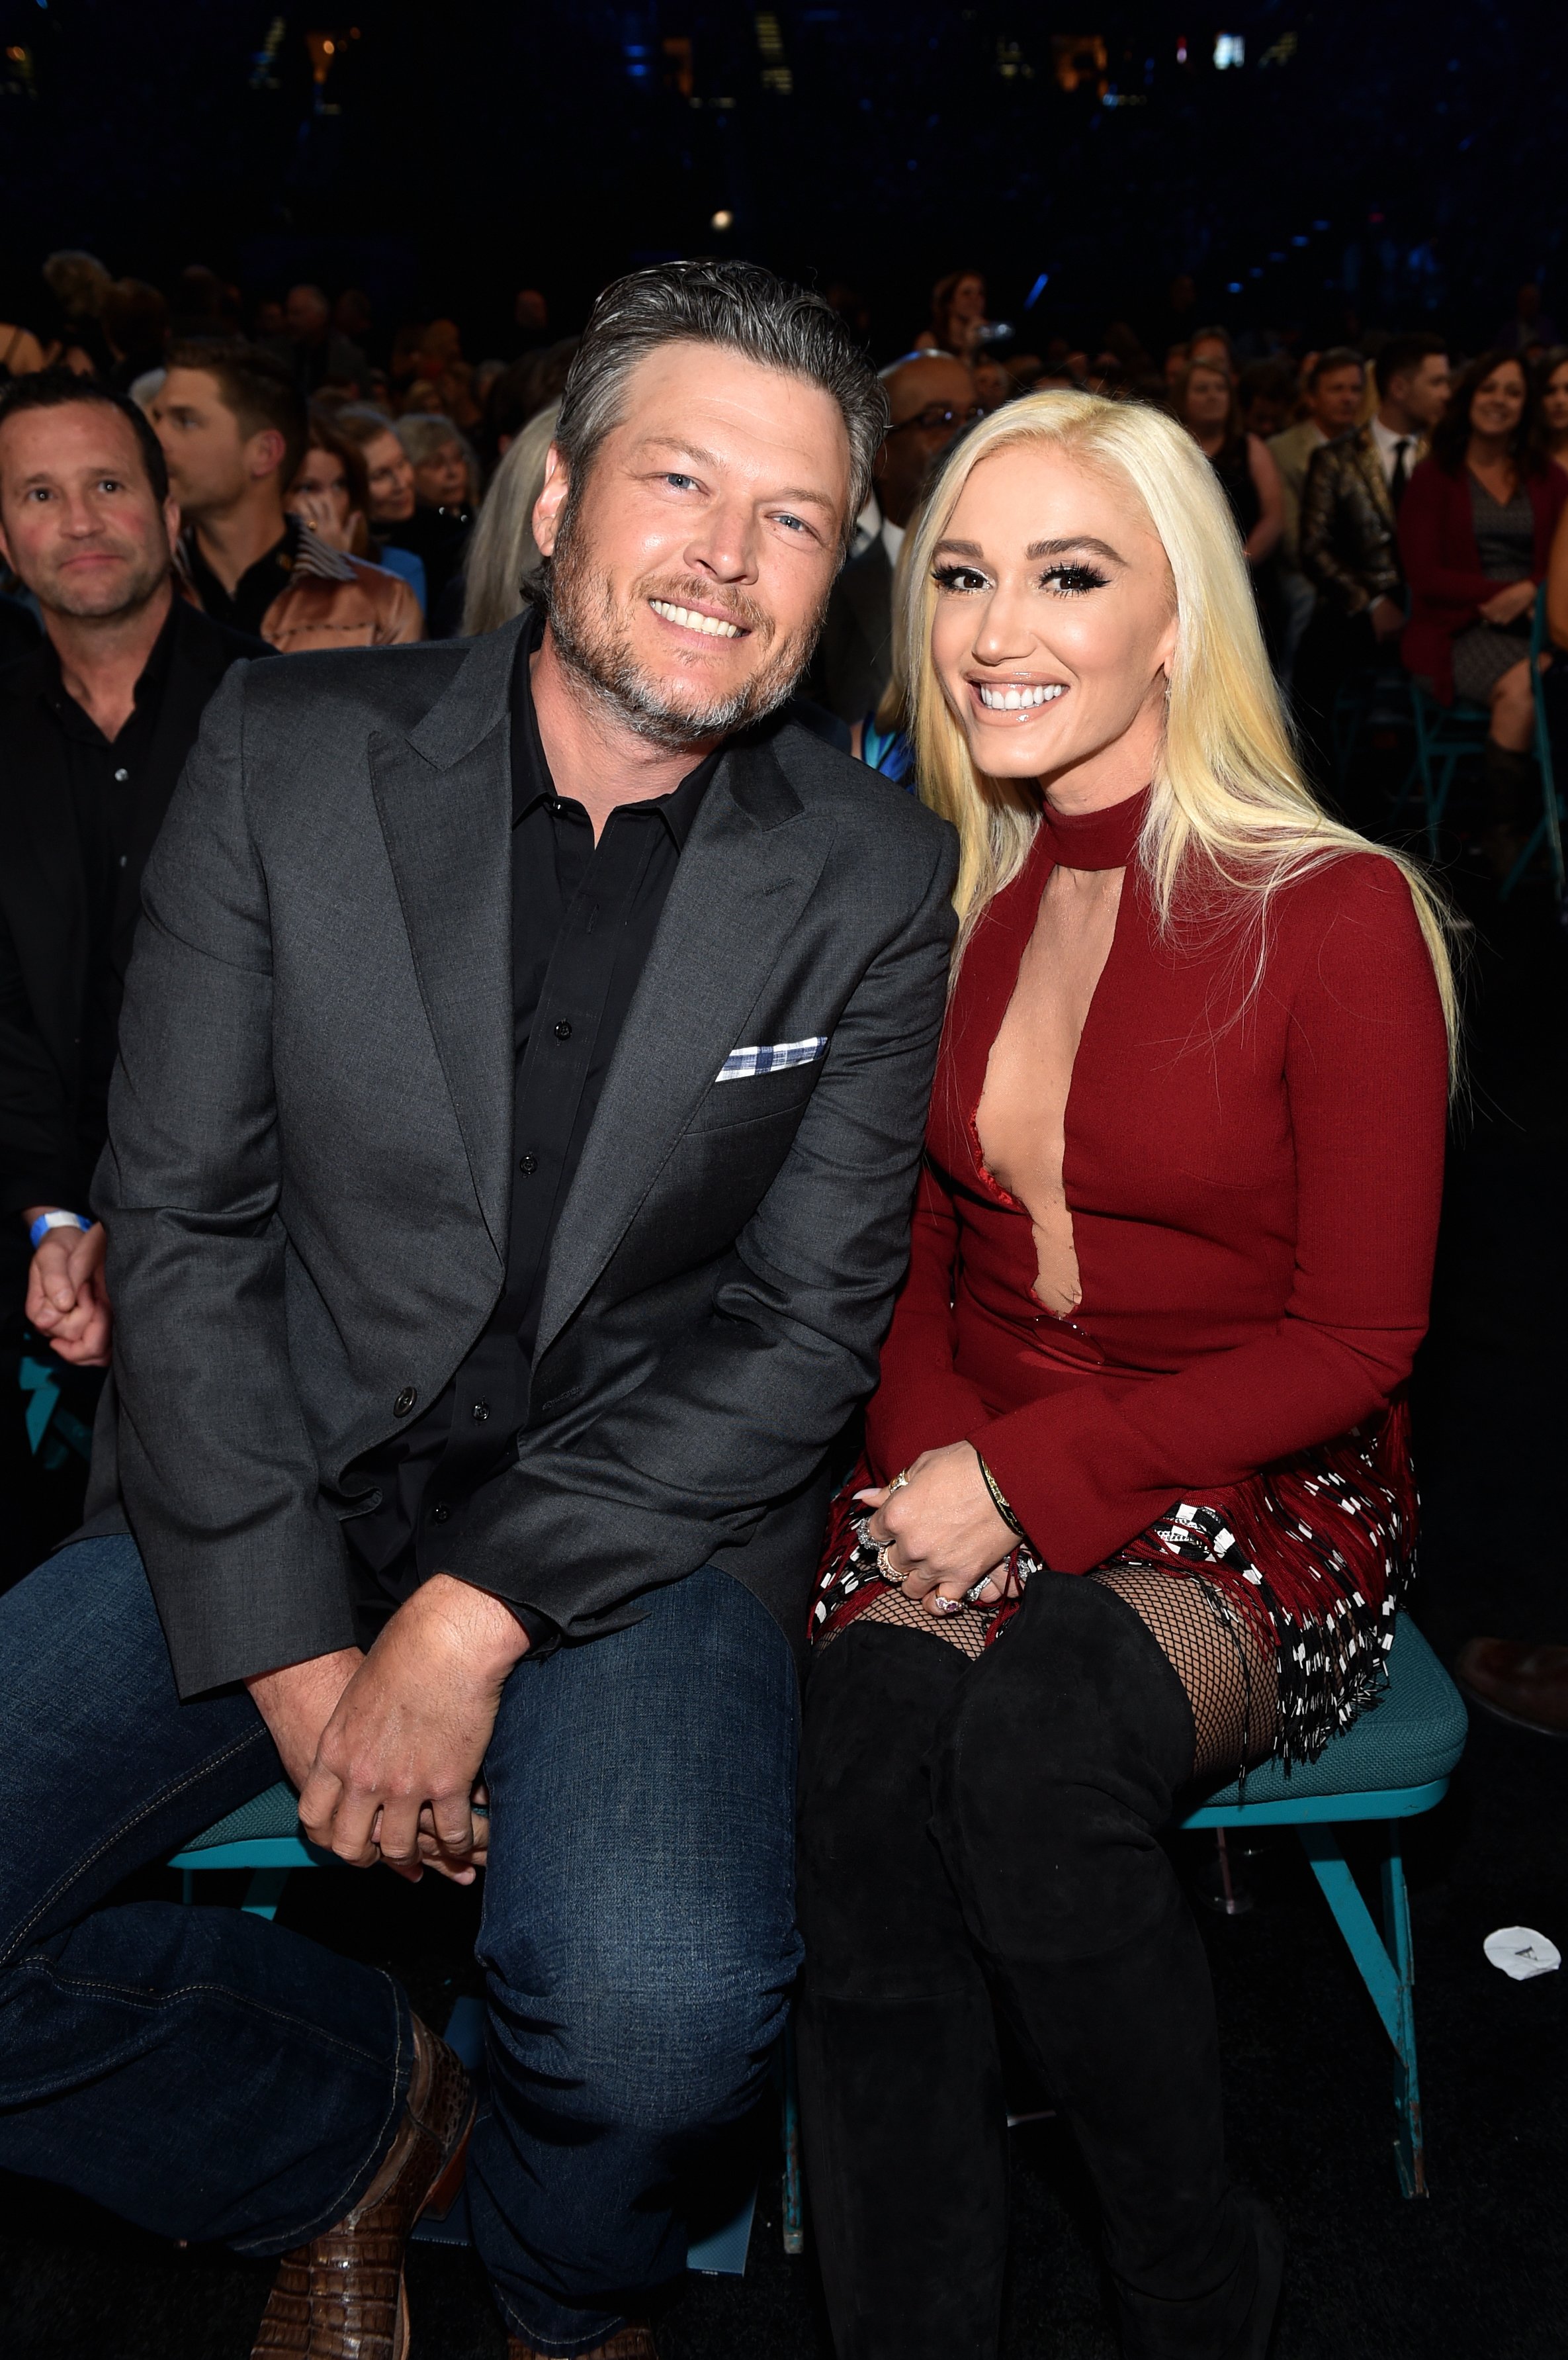 Blake Shelton and Gwen Stefani attend the 53rd Academy of Country Music Awards at MGM Grand Garden Arena on April 15, 2018 in Las Vegas, Nevada | Photo: Getty Images